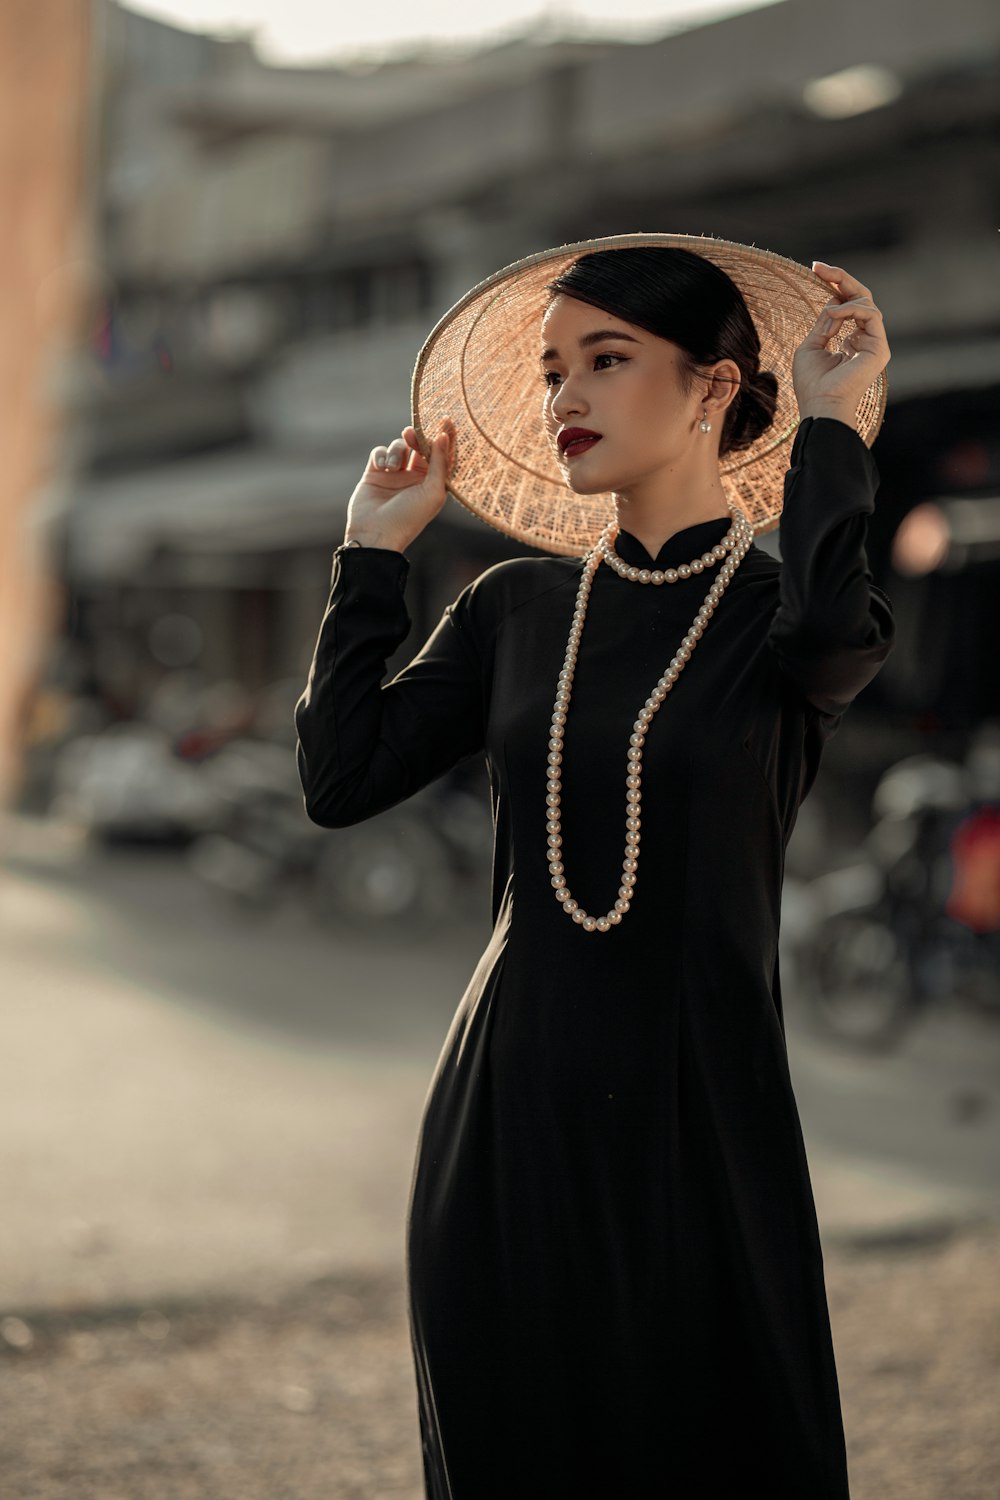 a woman in a black dress and a straw hat